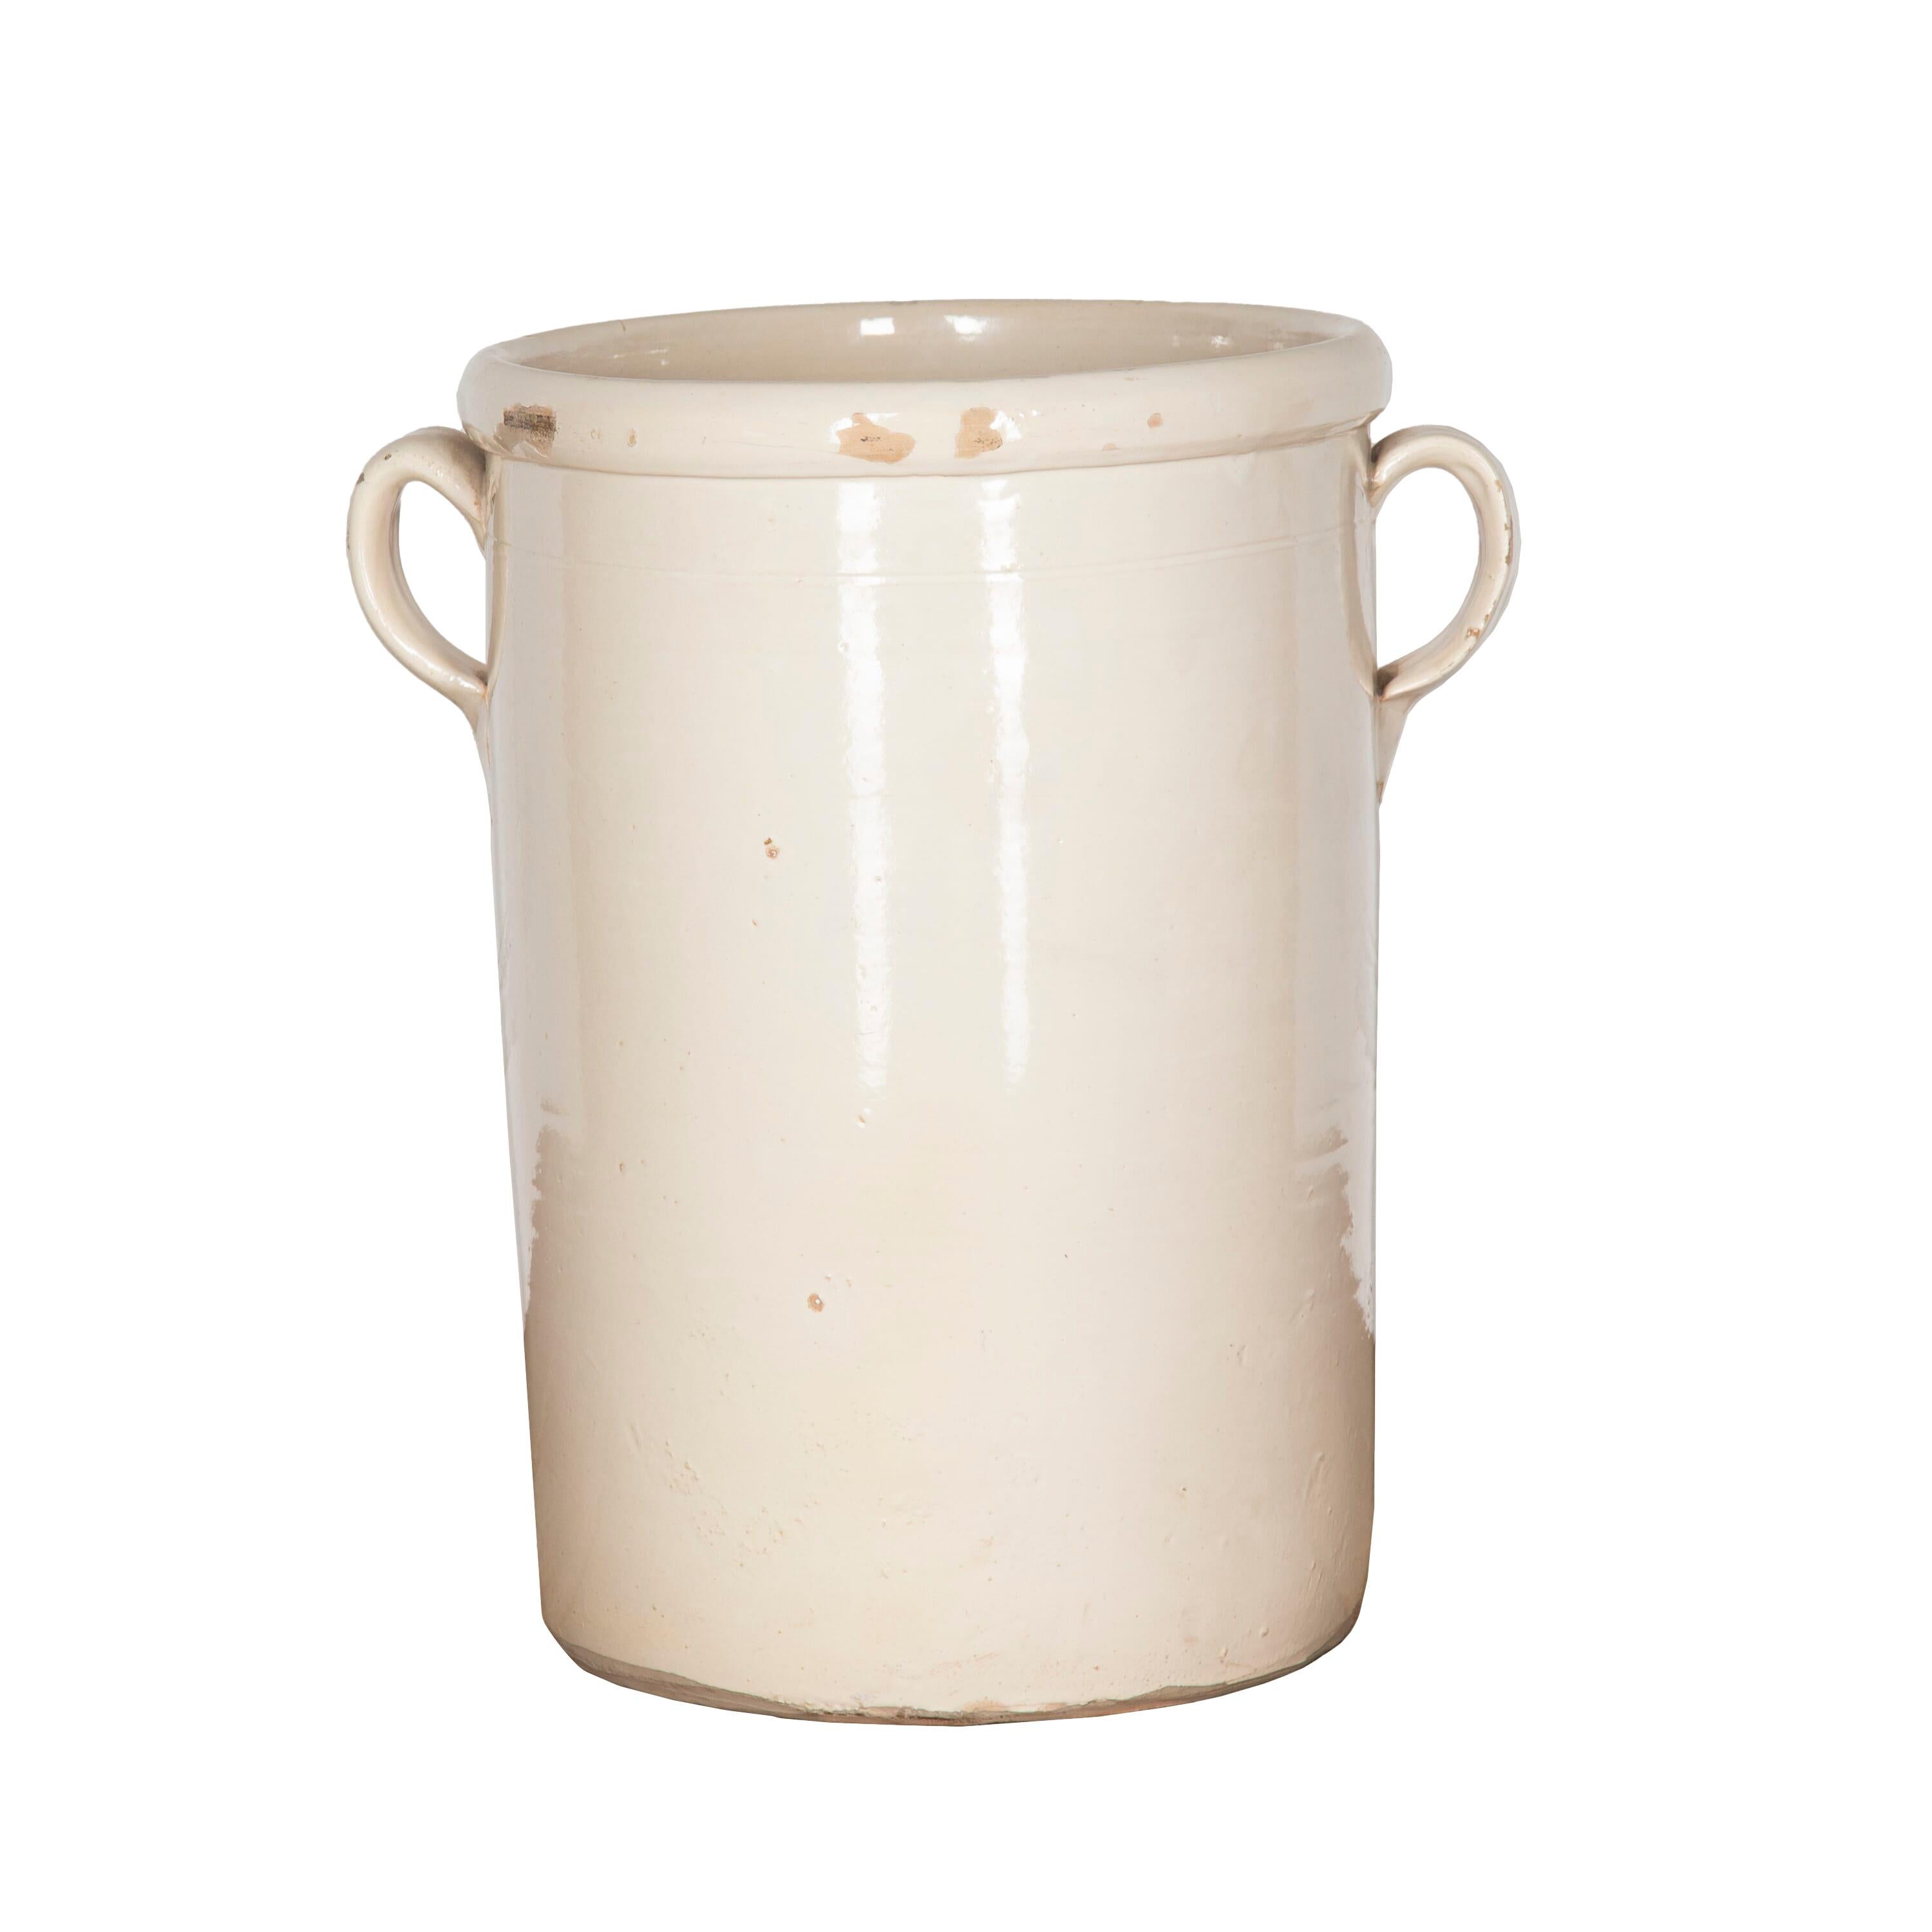 Extra large 20th century Italian confit pot.
Featuring two petite handles and a glazed exterior.